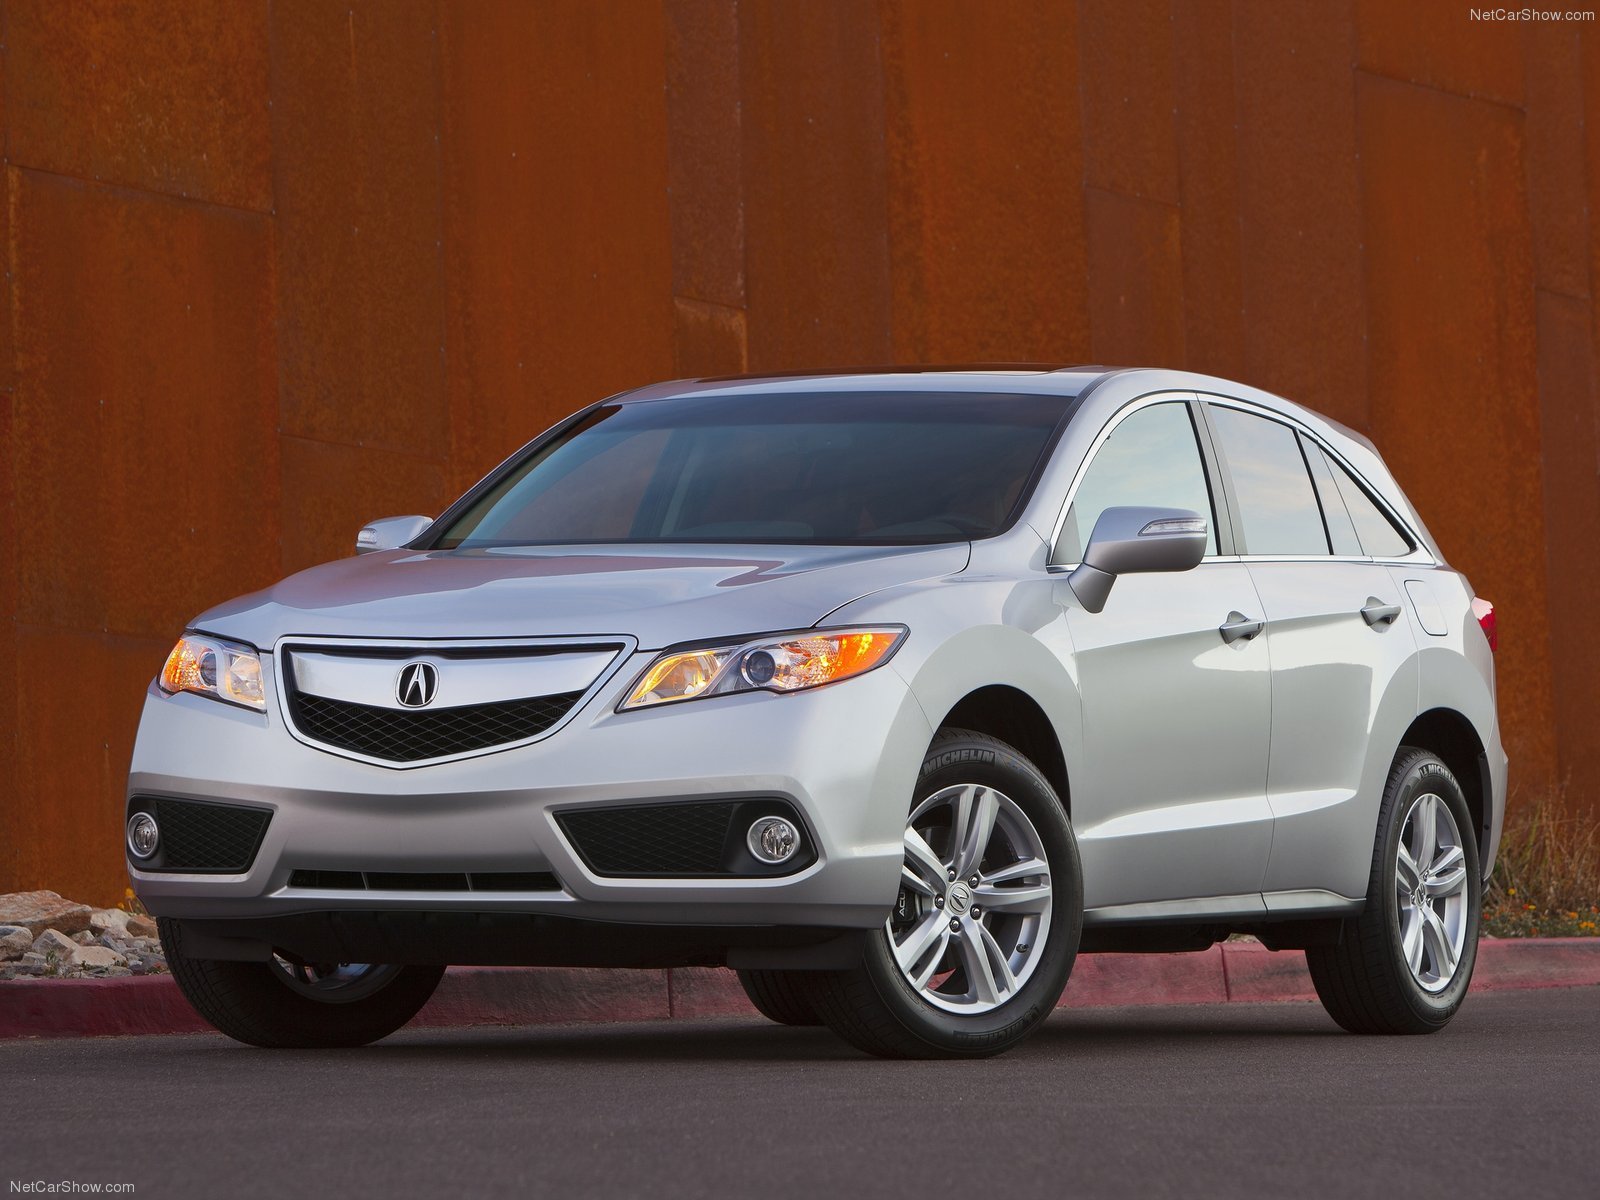 acura crossover ratings